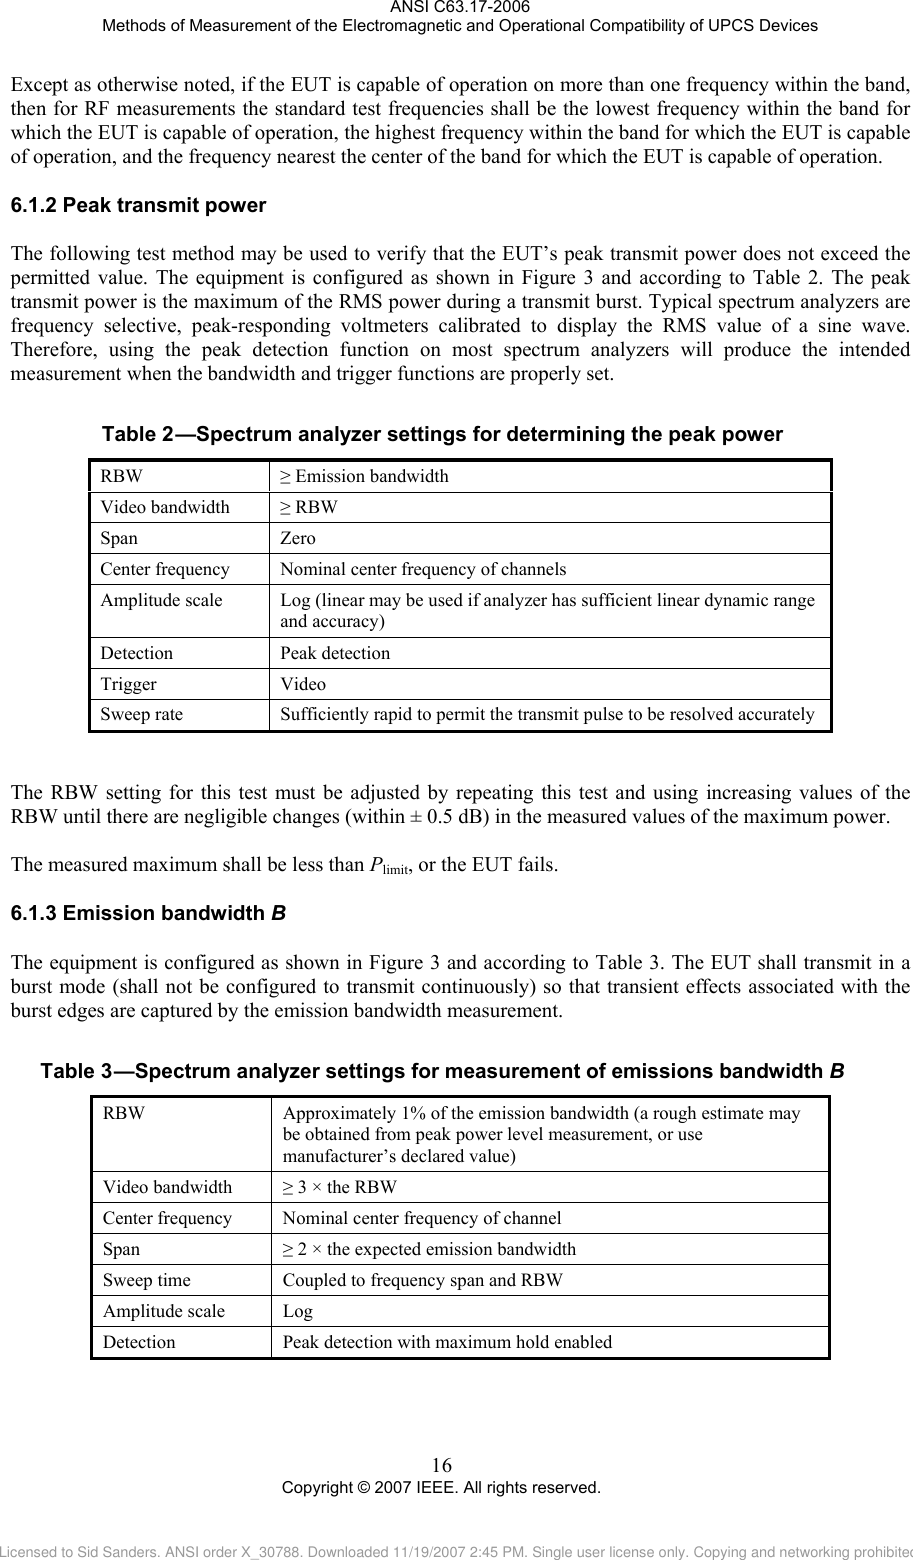 ANSI C63.17-2006 Methods of Measurement of the Electromagnetic and Operational Compatibility of UPCS Devices Except as otherwise noted, if the EUT is capable of operation on more than one frequency within the band, then for RF measurements the standard test frequencies shall be the lowest frequency within the band for which the EUT is capable of operation, the highest frequency within the band for which the EUT is capable of operation, and the frequency nearest the center of the band for which the EUT is capable of operation. 6.1.2Table 2 Peak transmit power The following test method may be used to verify that the EUT’s peak transmit power does not exceed the permitted value. The equipment is configured as shown in Figure 3 and according to Table 2. The peak transmit power is the maximum of the RMS power during a transmit burst. Typical spectrum analyzers are frequency selective, peak-responding voltmeters calibrated to display the RMS value of a sine wave. Therefore, using the peak detection function on most spectrum analyzers will produce the intended measurement when the bandwidth and trigger functions are properly set.   —Spectrum analyzer settings for determining the peak power RBW  ≥ Emission bandwidth Video bandwidth  ≥ RBW Span Zero Center frequency  Nominal center frequency of channels Amplitude scale  Log (linear may be used if analyzer has sufficient linear dynamic range and accuracy) Detection Peak detection Trigger Video Sweep rate  Sufficiently rapid to permit the transmit pulse to be resolved accurately   The RBW setting for this test must be adjusted by repeating this test and using increasing values of the RBW until there are negligible changes (within ± 0.5 dB) in the measured values of the maximum power.   The measured maximum shall be less than Plimit, or the EUT fails. 6.1.3Table 3 Emission bandwidth B The equipment is configured as shown in Figure 3 and according to Table 3. The EUT shall transmit in a burst mode (shall not be configured to transmit continuously) so that transient effects associated with the burst edges are captured by the emission bandwidth measurement.   —Spectrum analyzer settings for measurement of emissions bandwidth B RBW  Approximately 1% of the emission bandwidth (a rough estimate may be obtained from peak power level measurement, or use manufacturer’s declared value) Video bandwidth  ≥ 3 × the RBW Center frequency  Nominal center frequency of channel Span  ≥ 2 × the expected emission bandwidth Sweep time  Coupled to frequency span and RBW Amplitude scale  Log Detection  Peak detection with maximum hold enabled 16 Copyright © 2007 IEEE. All rights reserved. Licensed to Sid Sanders. ANSI order X_30788. Downloaded 11/19/2007 2:45 PM. Single user license only. Copying and networking prohibited.